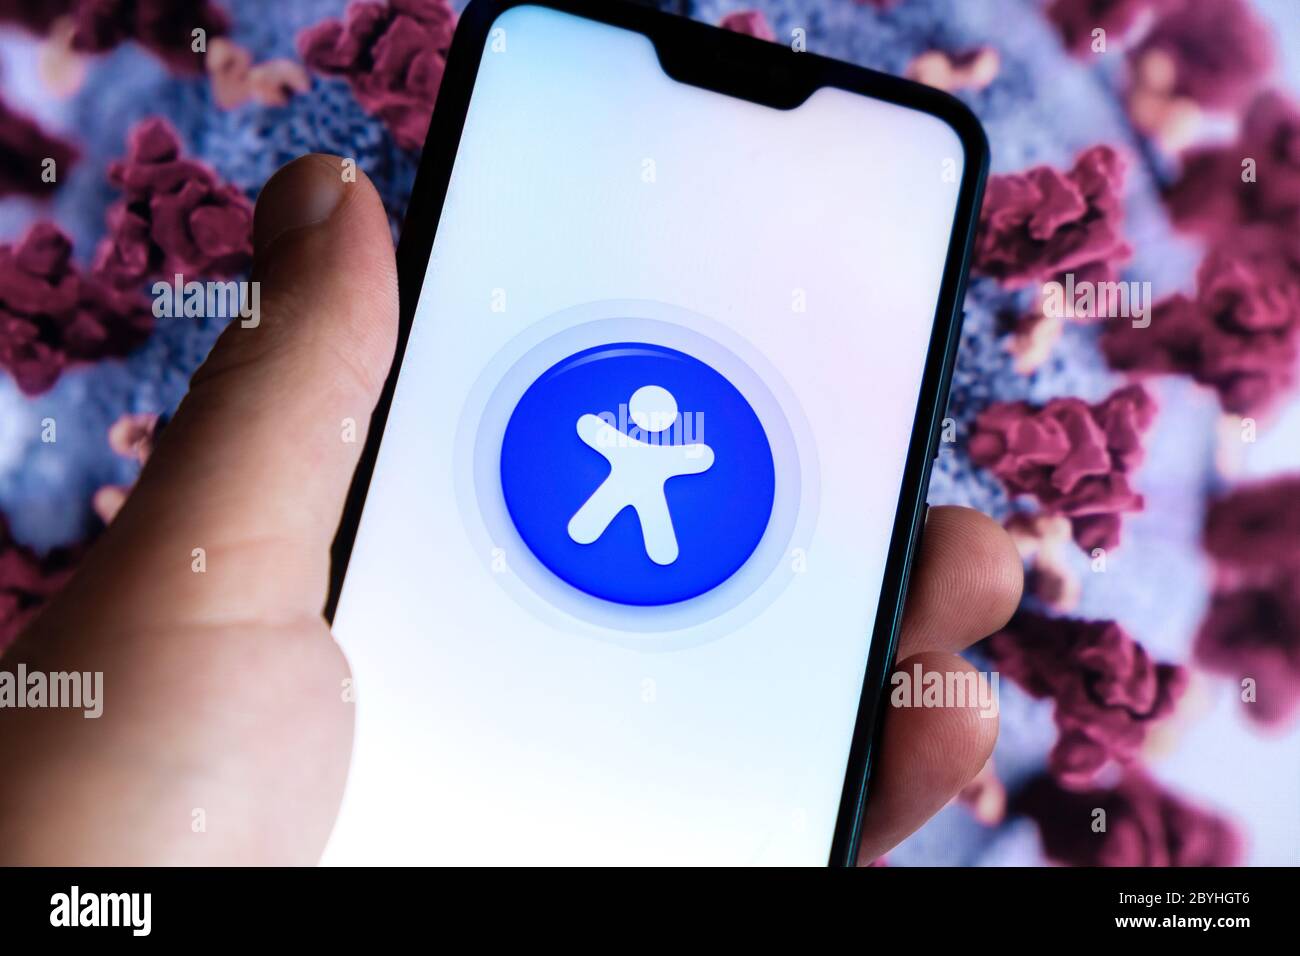 New phone app Immuni, promoted by the Italian government and developed by Bending Spoon, for contact tracing COVID-19 cases among Italy's citizens Stock Photo